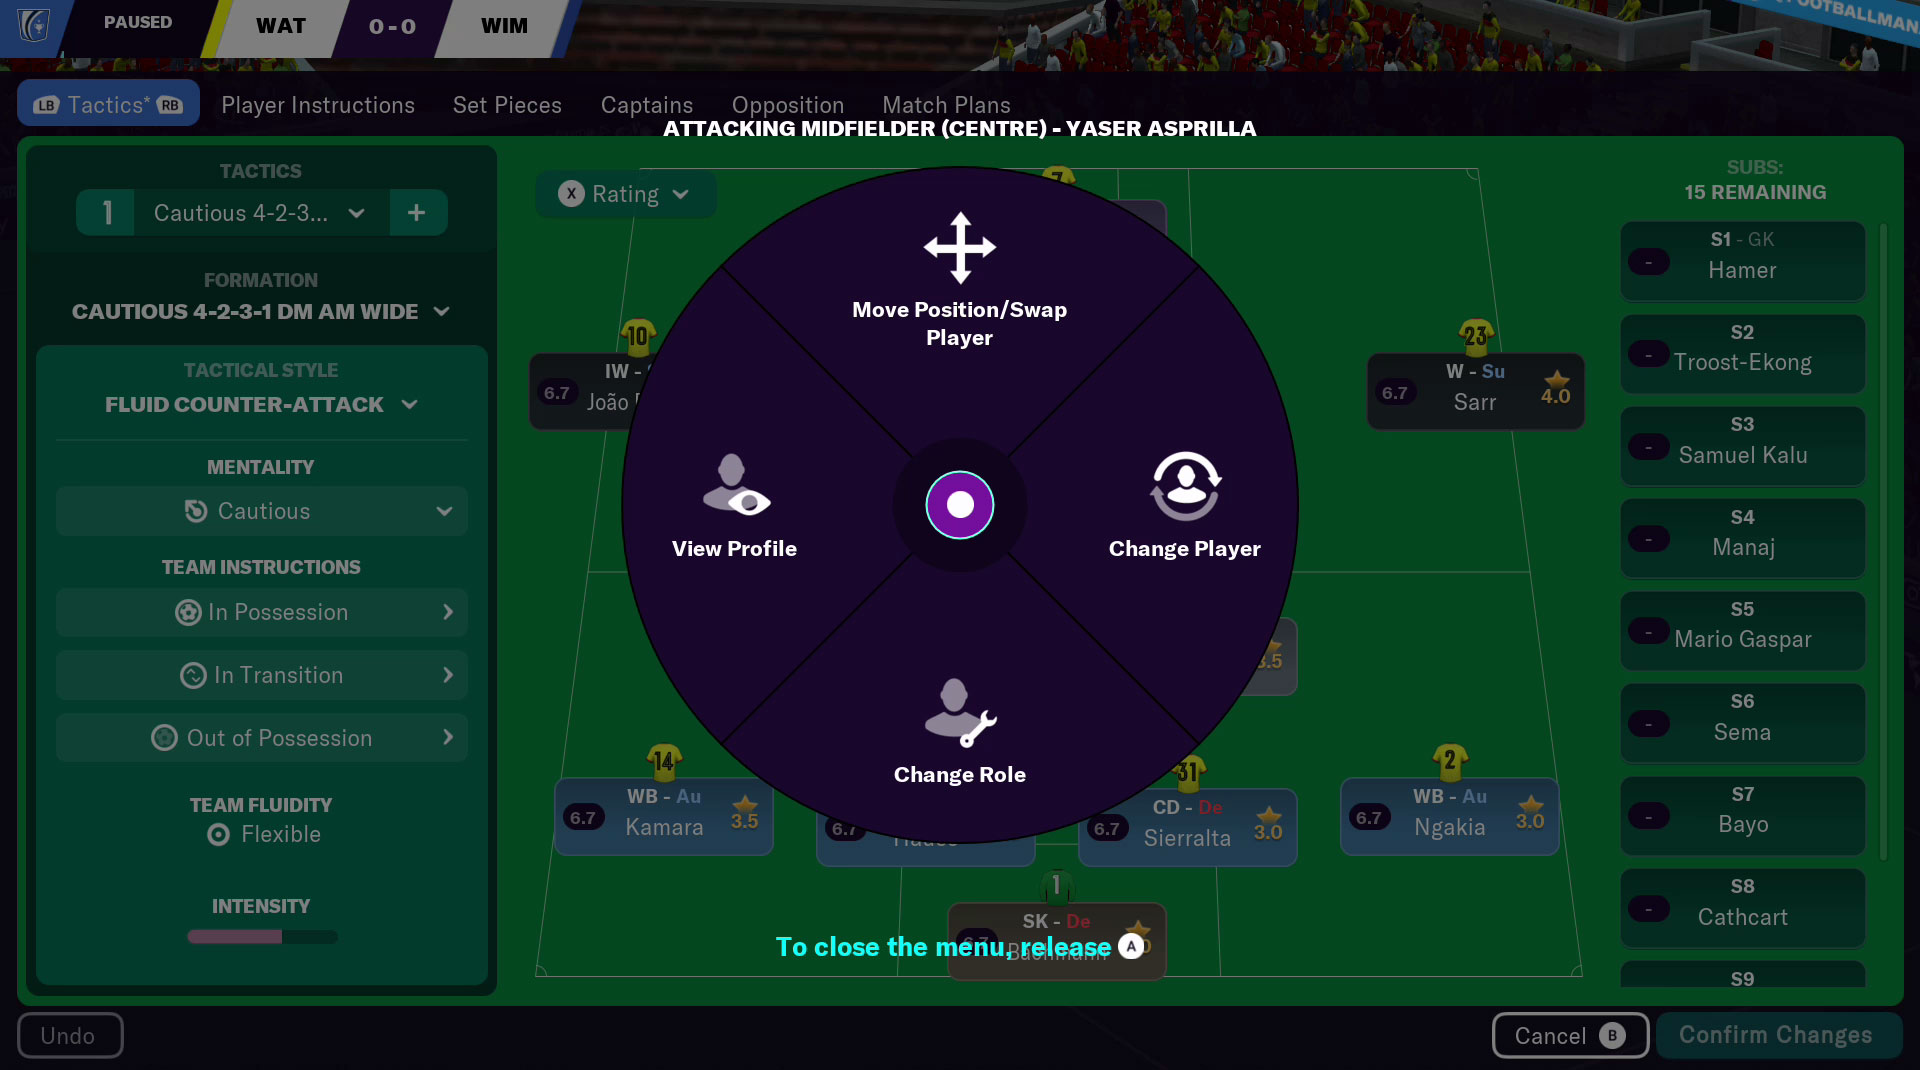 Football Manager 2023 Console Review